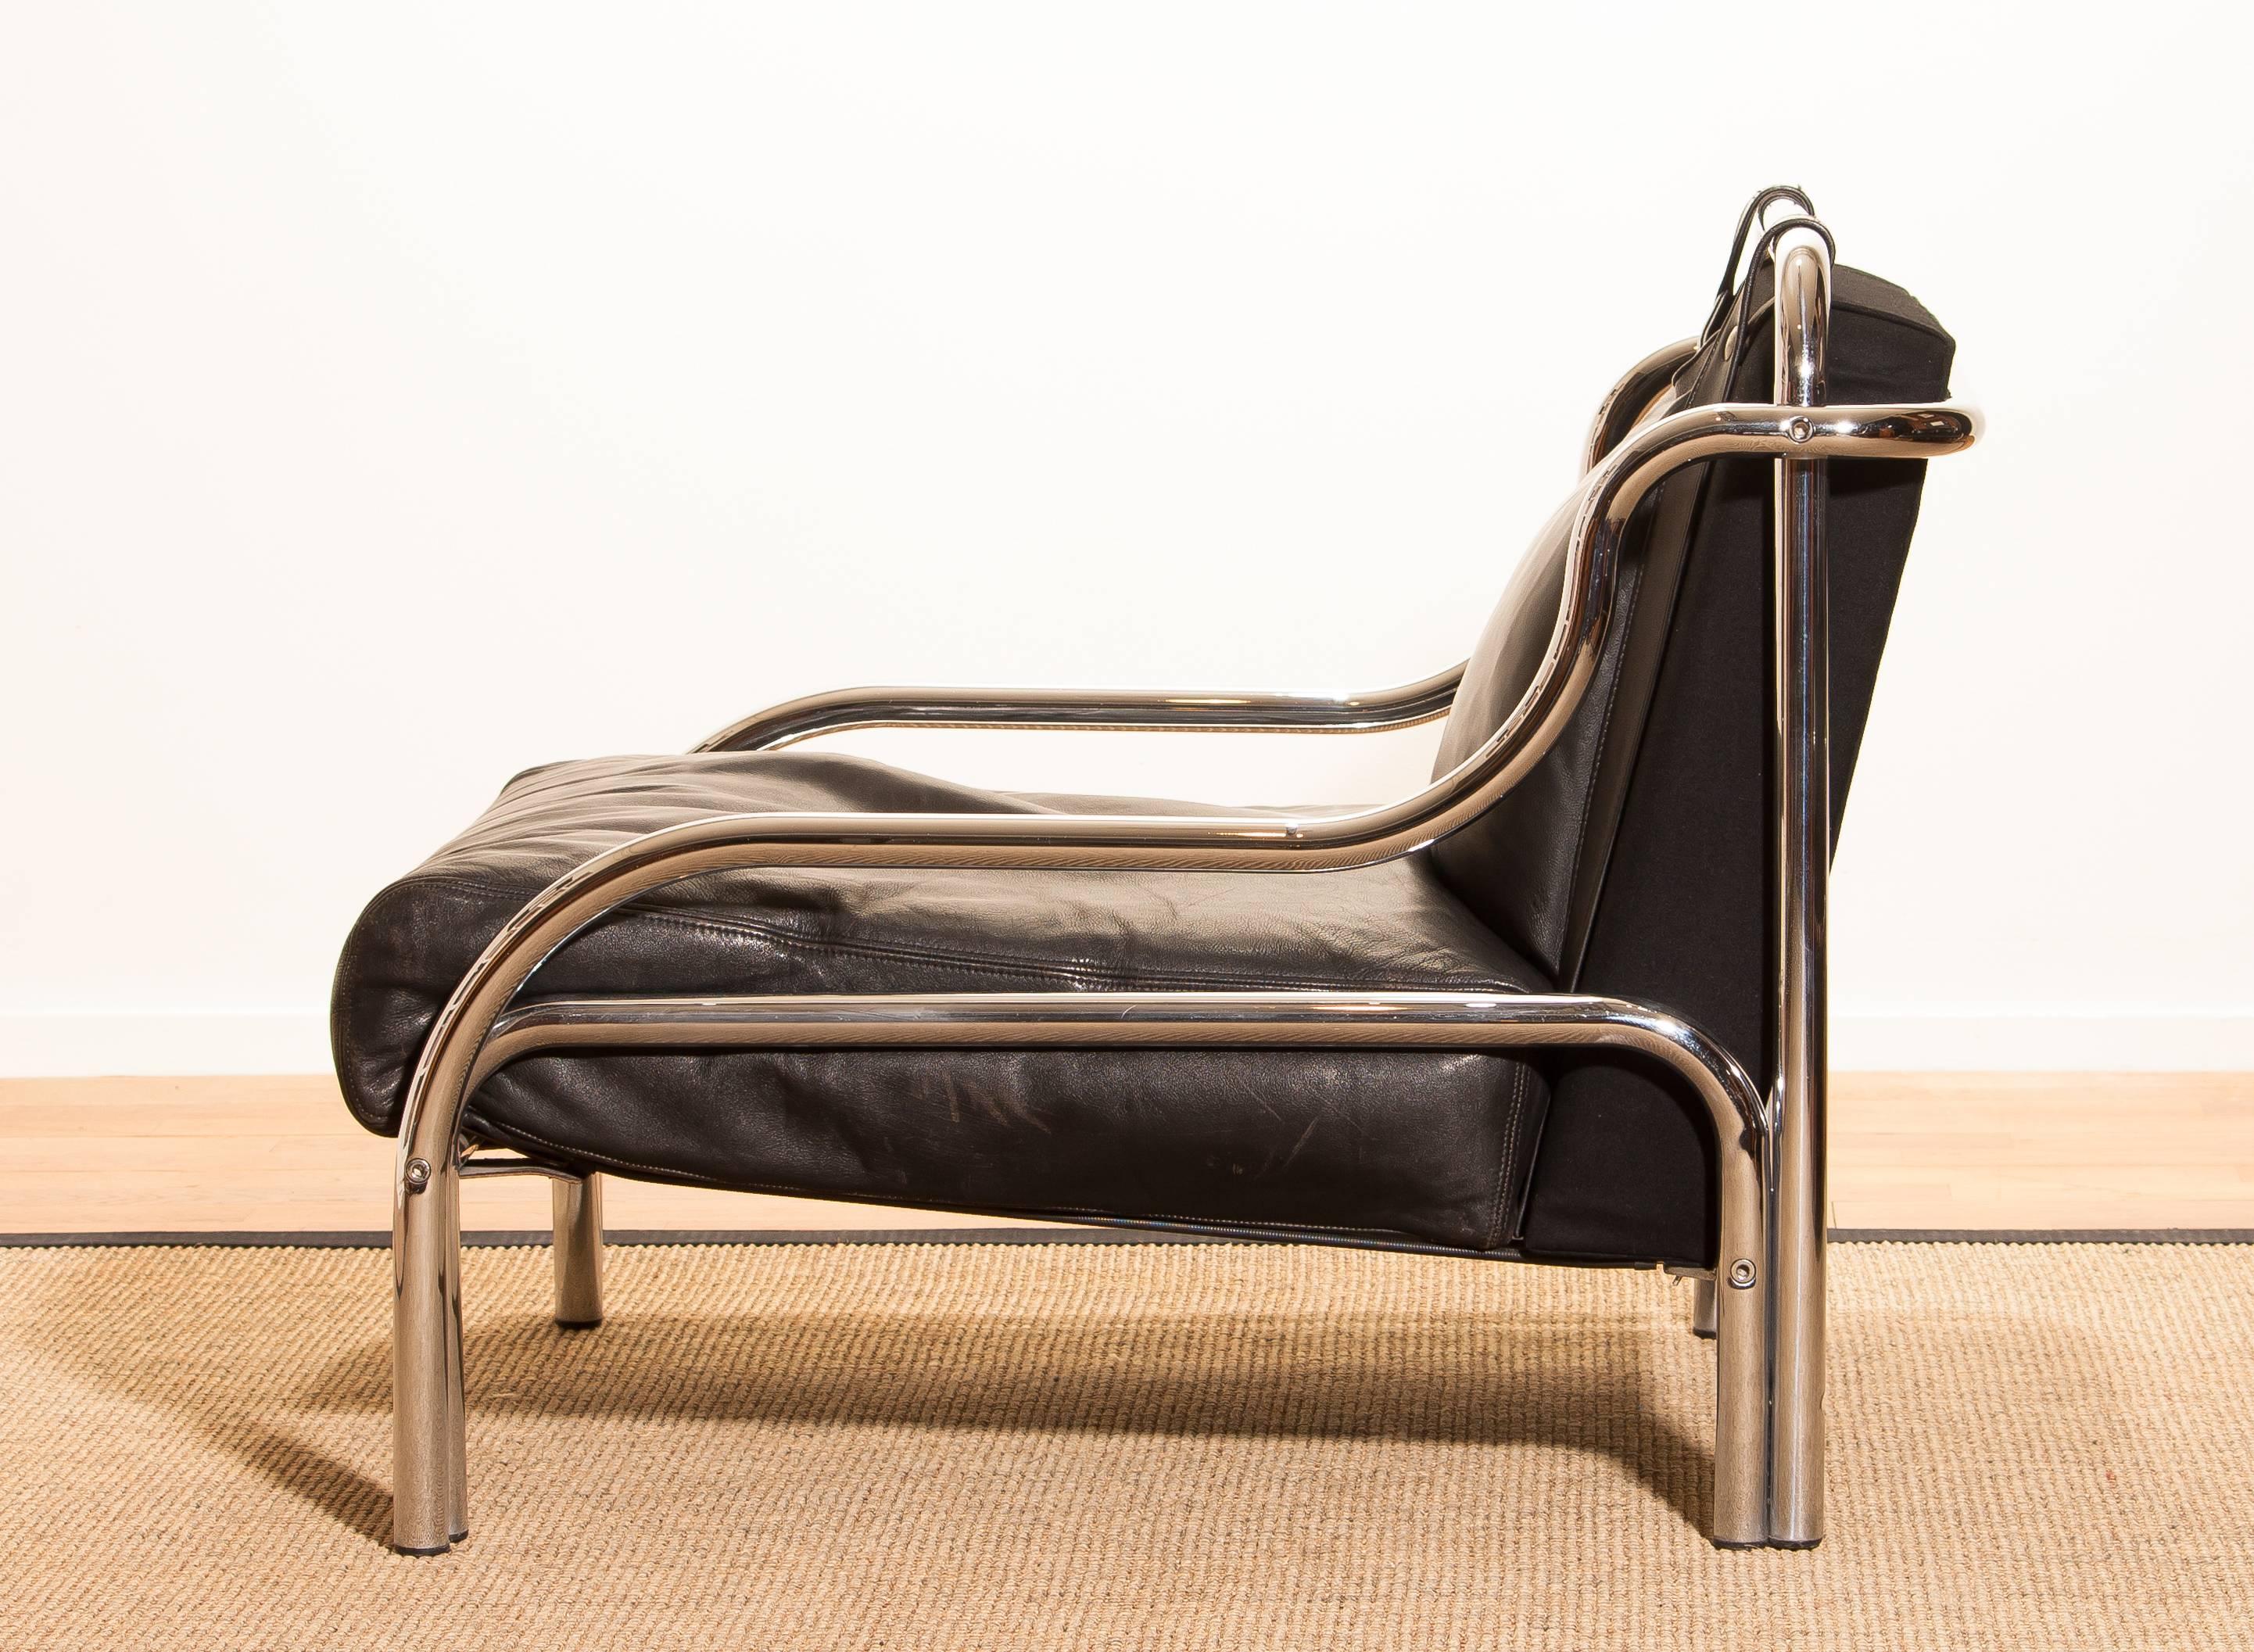 1960s, Leather and Chrome Lounge Chair by Gae Aulenti for Poltronova 4